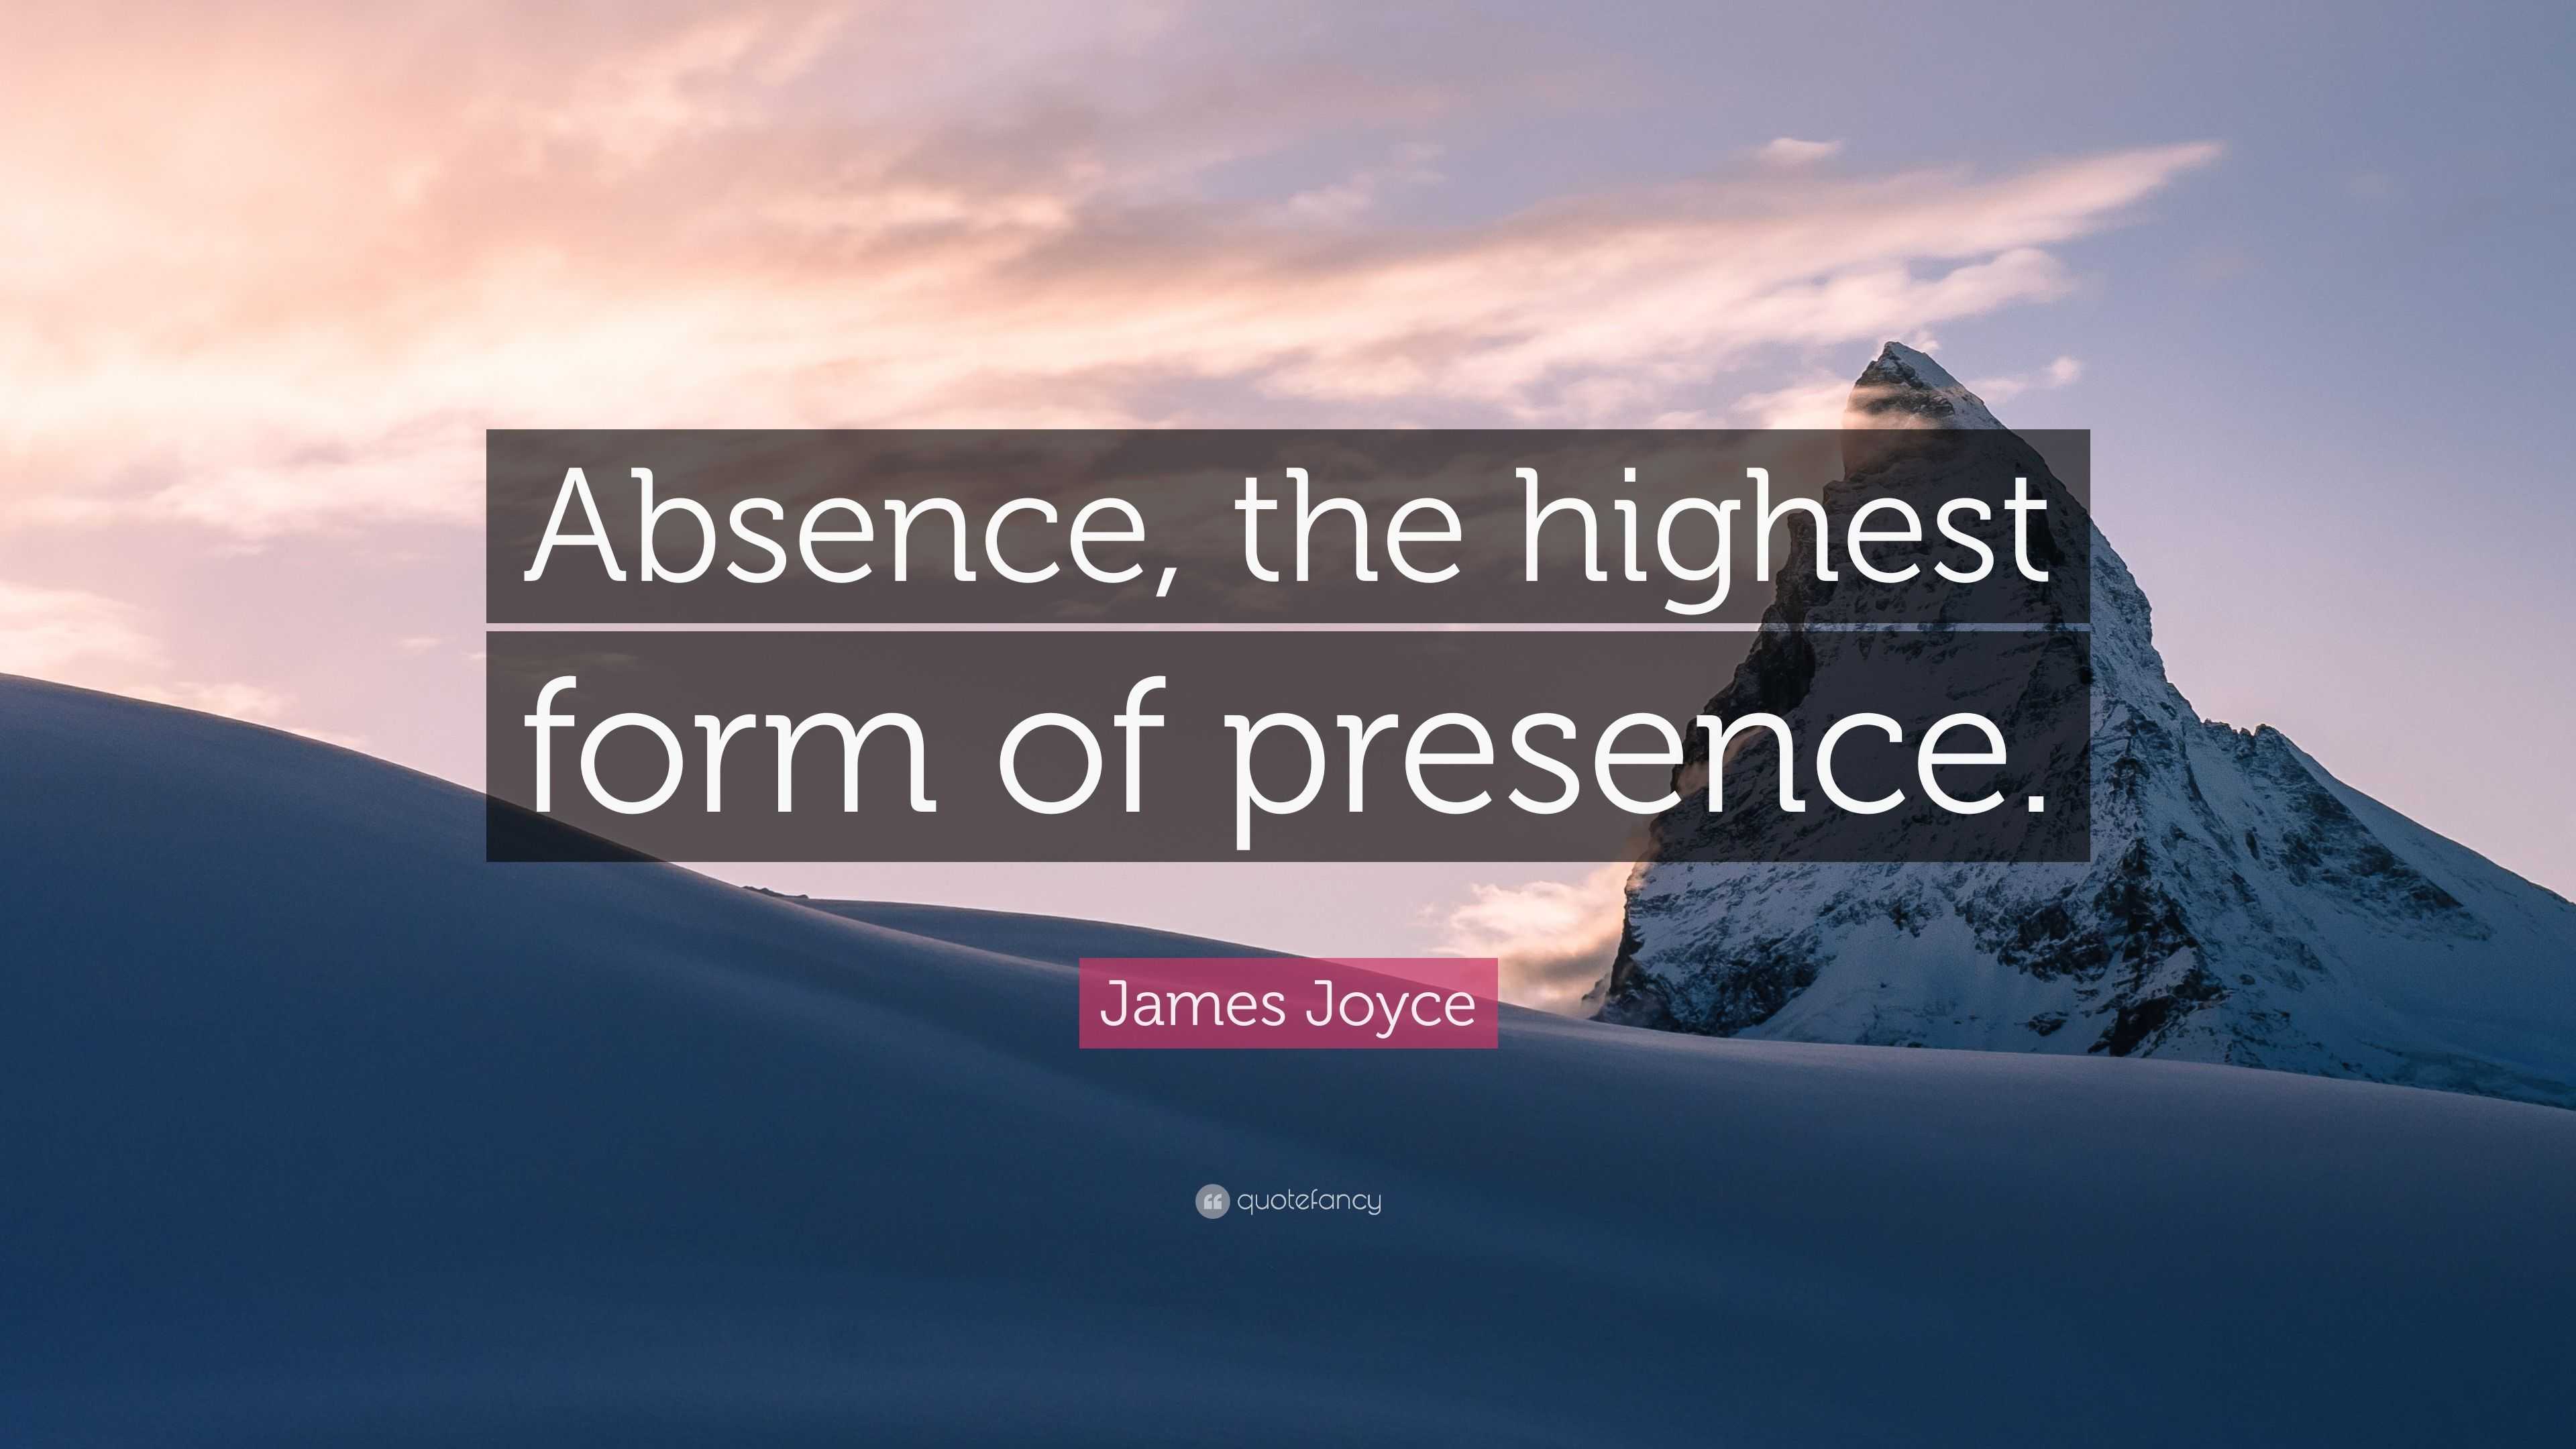 James Joyce Quote: "Absence, the highest form of presence." (12 wallpapers) - Quotefancy